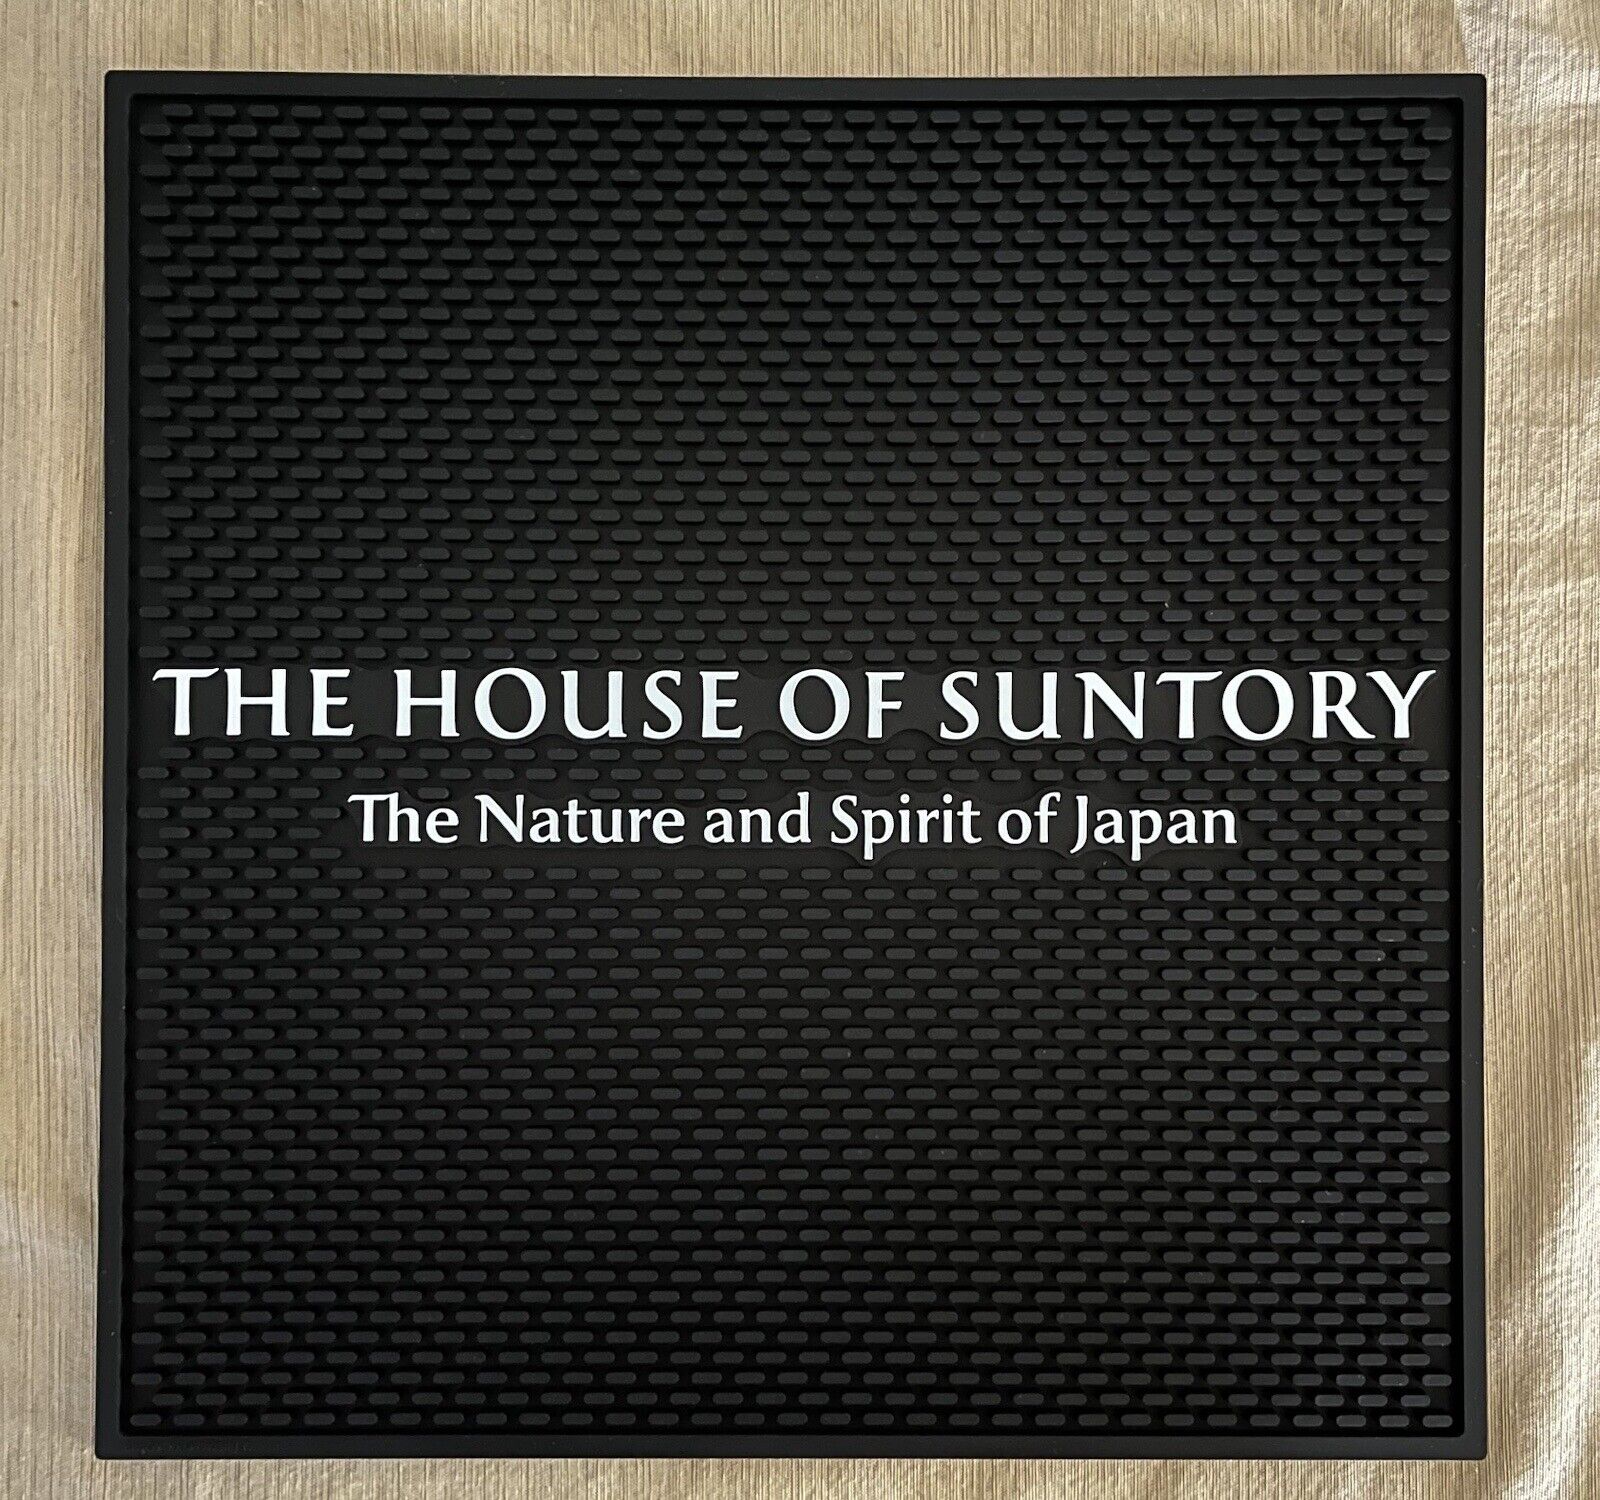 THE HOUSE OF SUNTORY JAPANESE WHISKY SQUARE BAR SERVICE SPILL MAT COASTER *NEW*